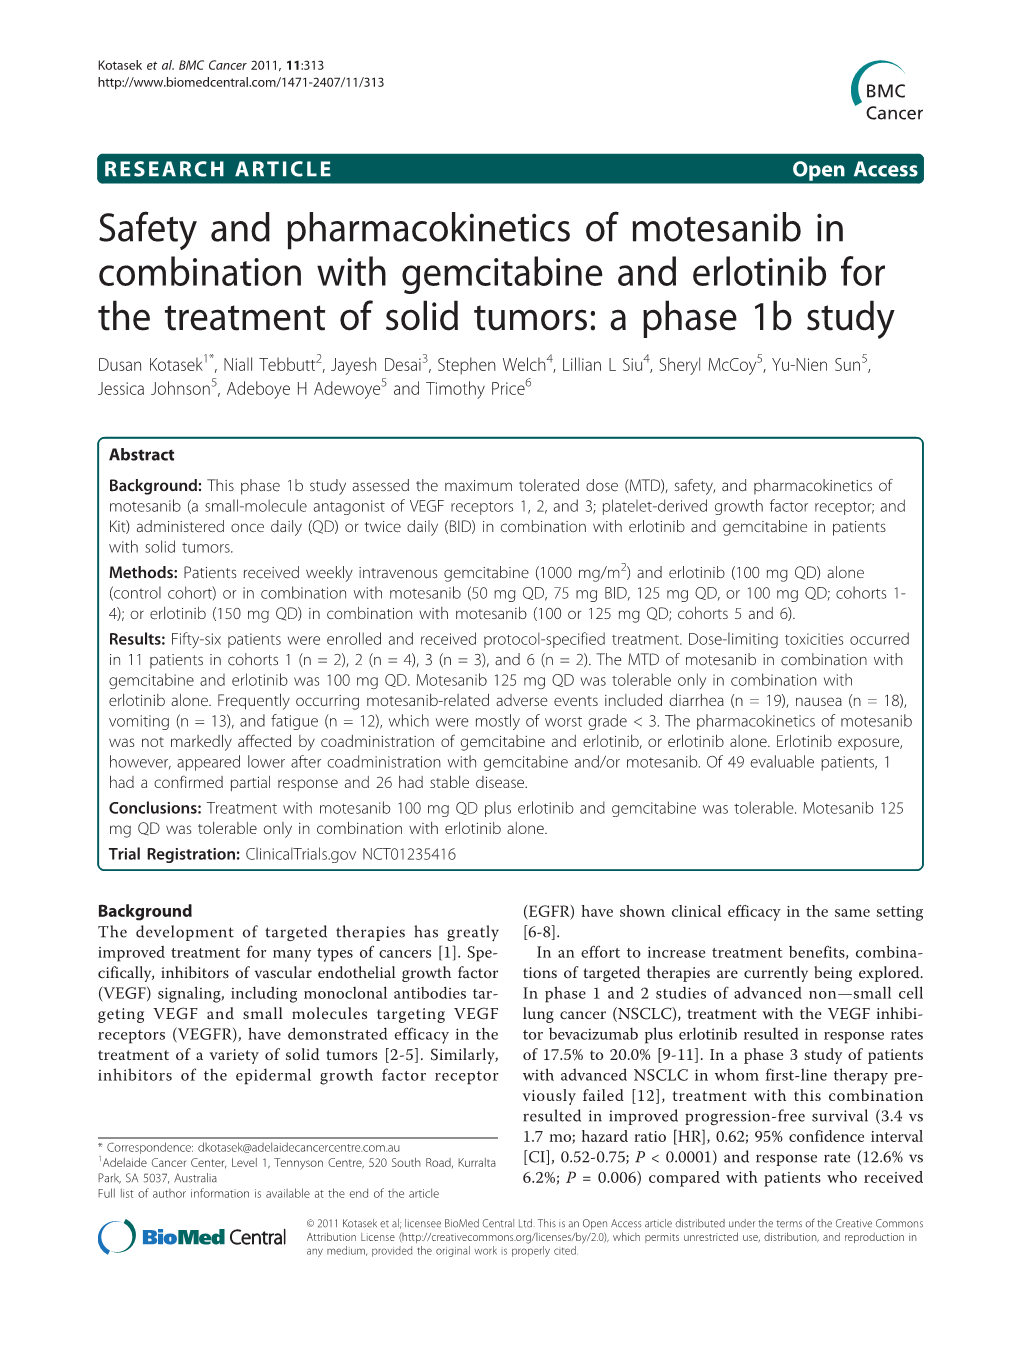 Safety and Pharmacokinetics of Motesanib in Combination